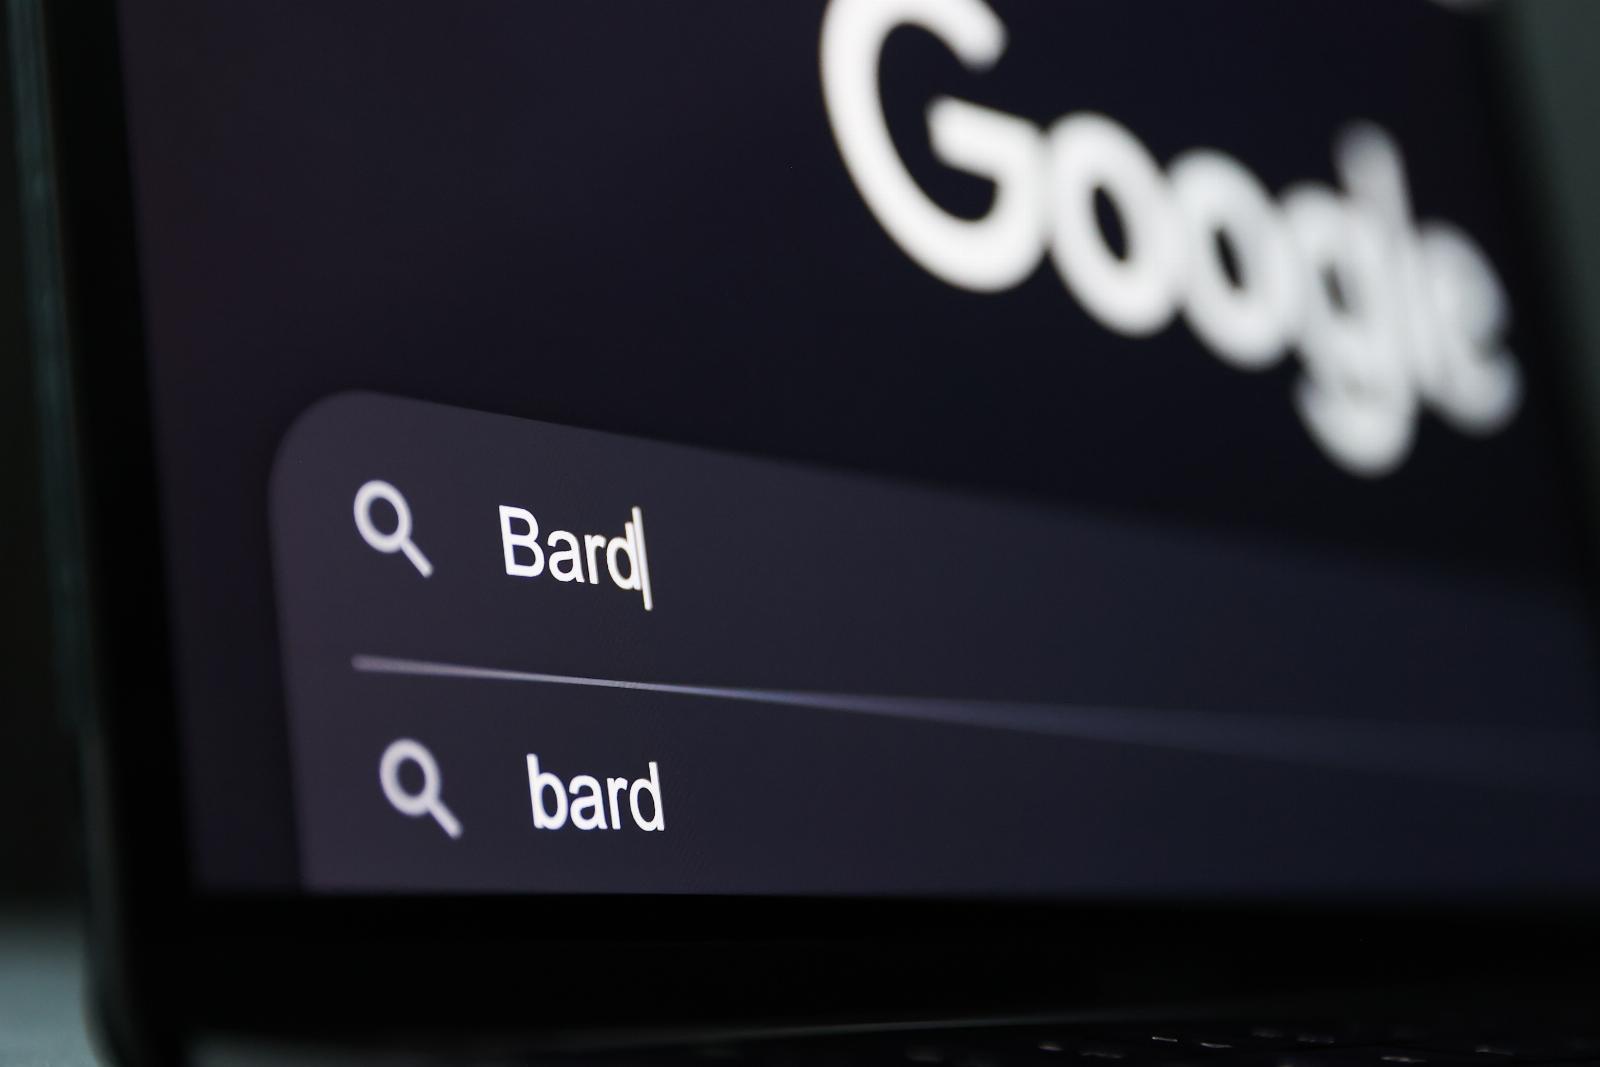 Google launches a smarter Bard